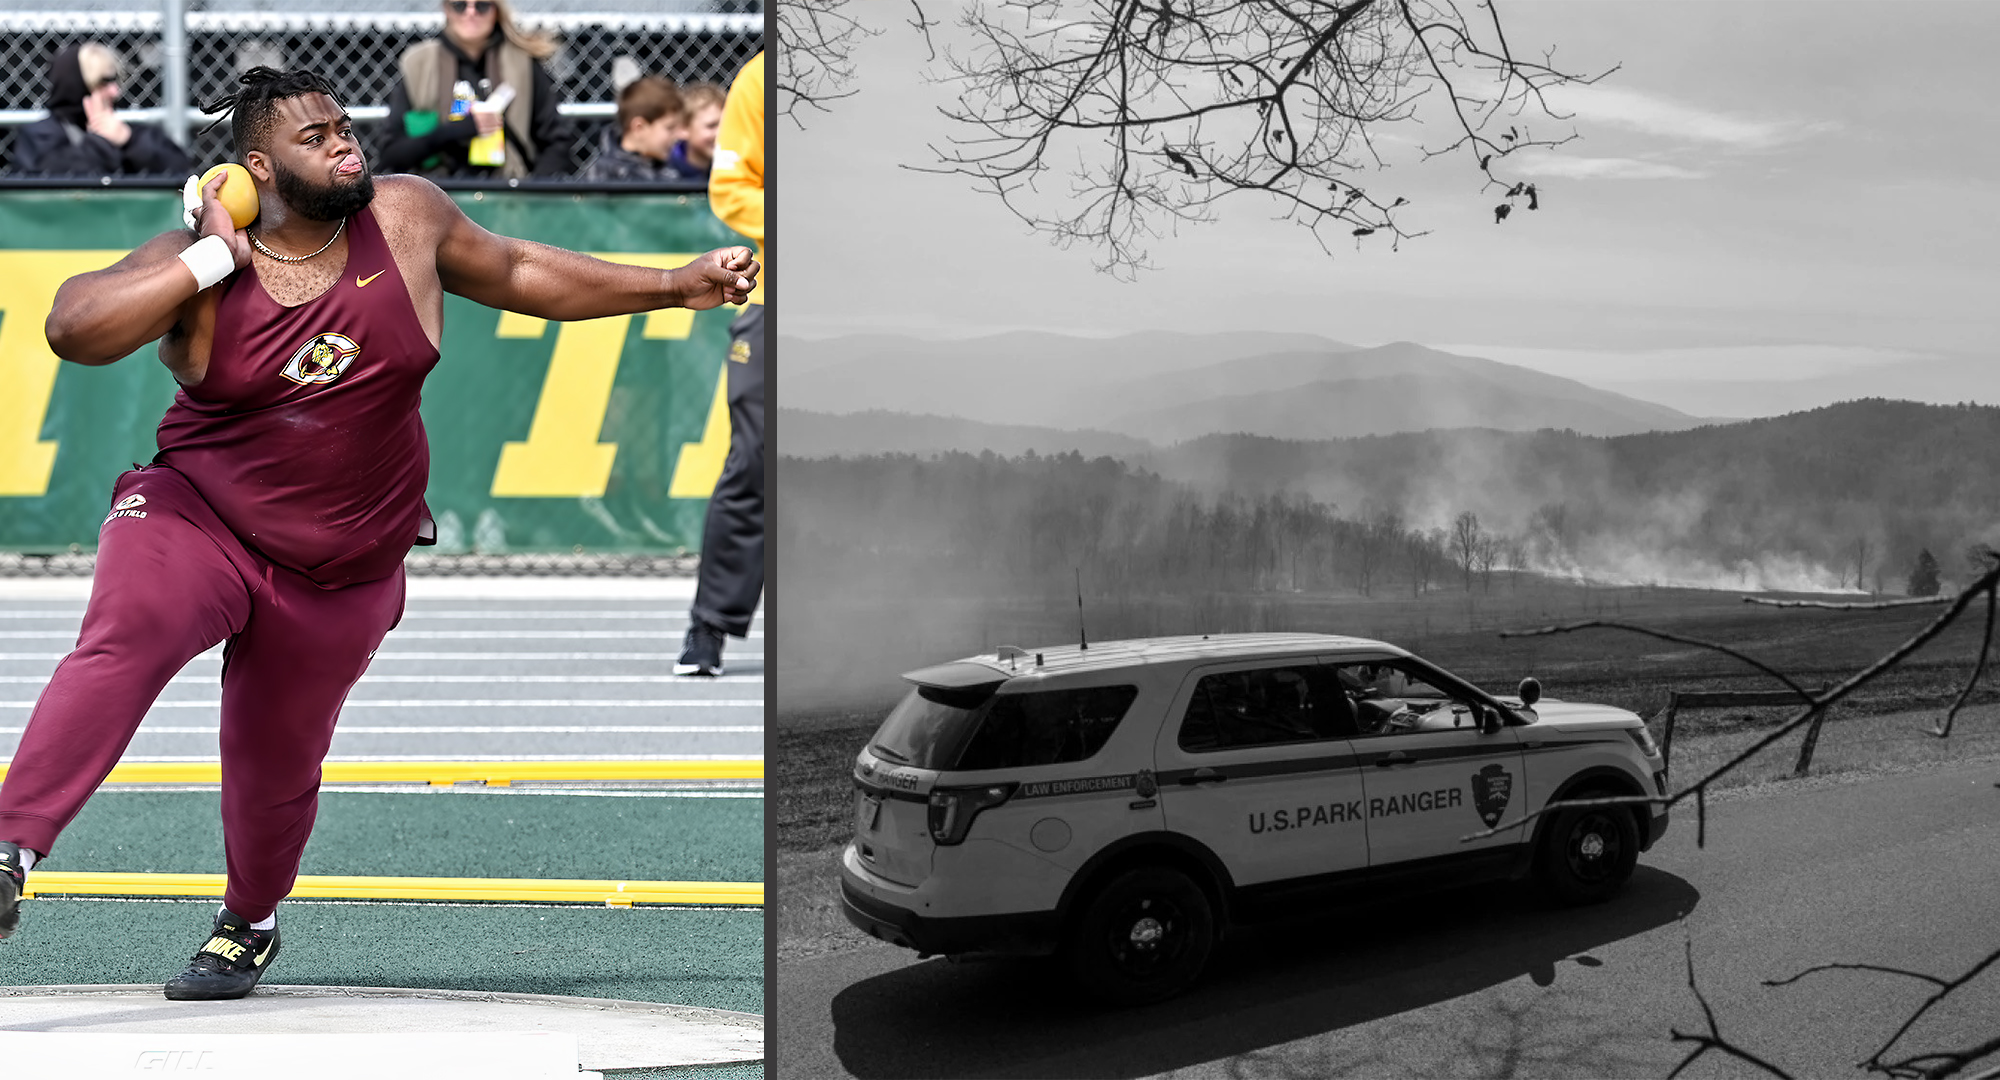 Senior Cooper Folkestad has an affinity for photography, specifically landscapes (pic on the right) and shot put suspense.